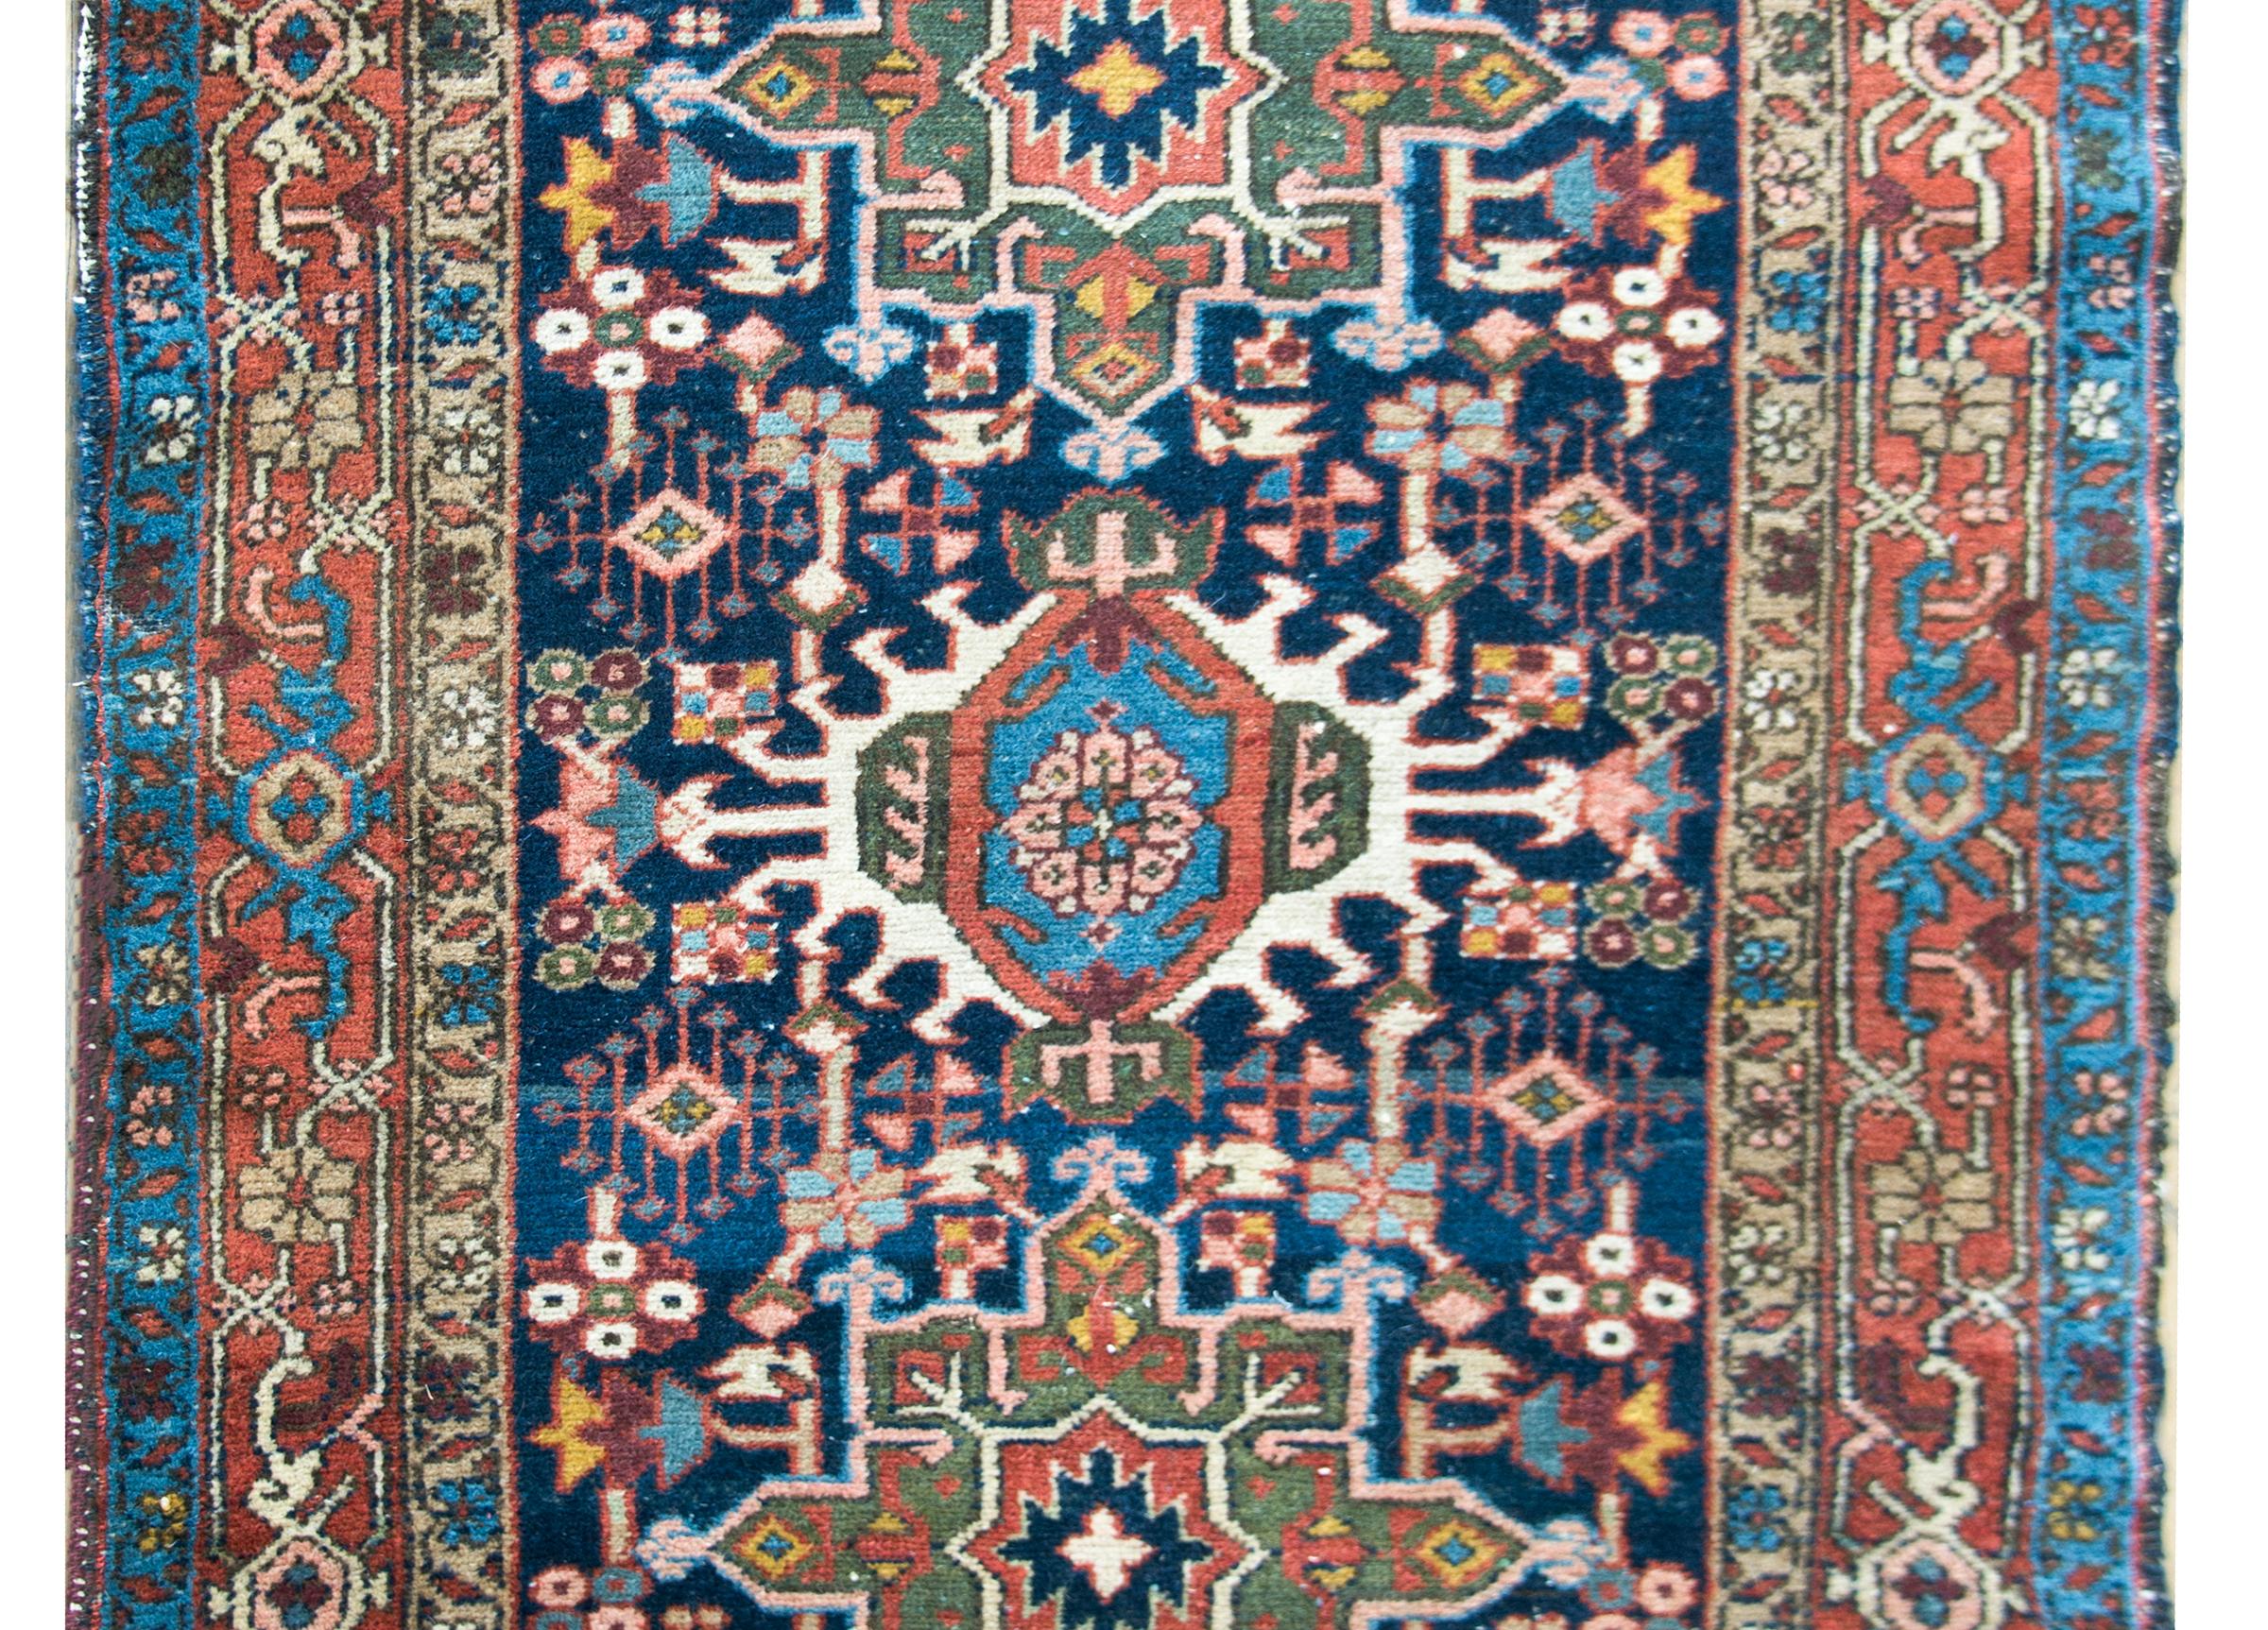 A beautiful early 20th century Persian Heriz rug with three large stylized floral medallions amidst a field of more densely woven flowers, and surrounded by a border with three distinct floral and scrolling vine patterned stripes.